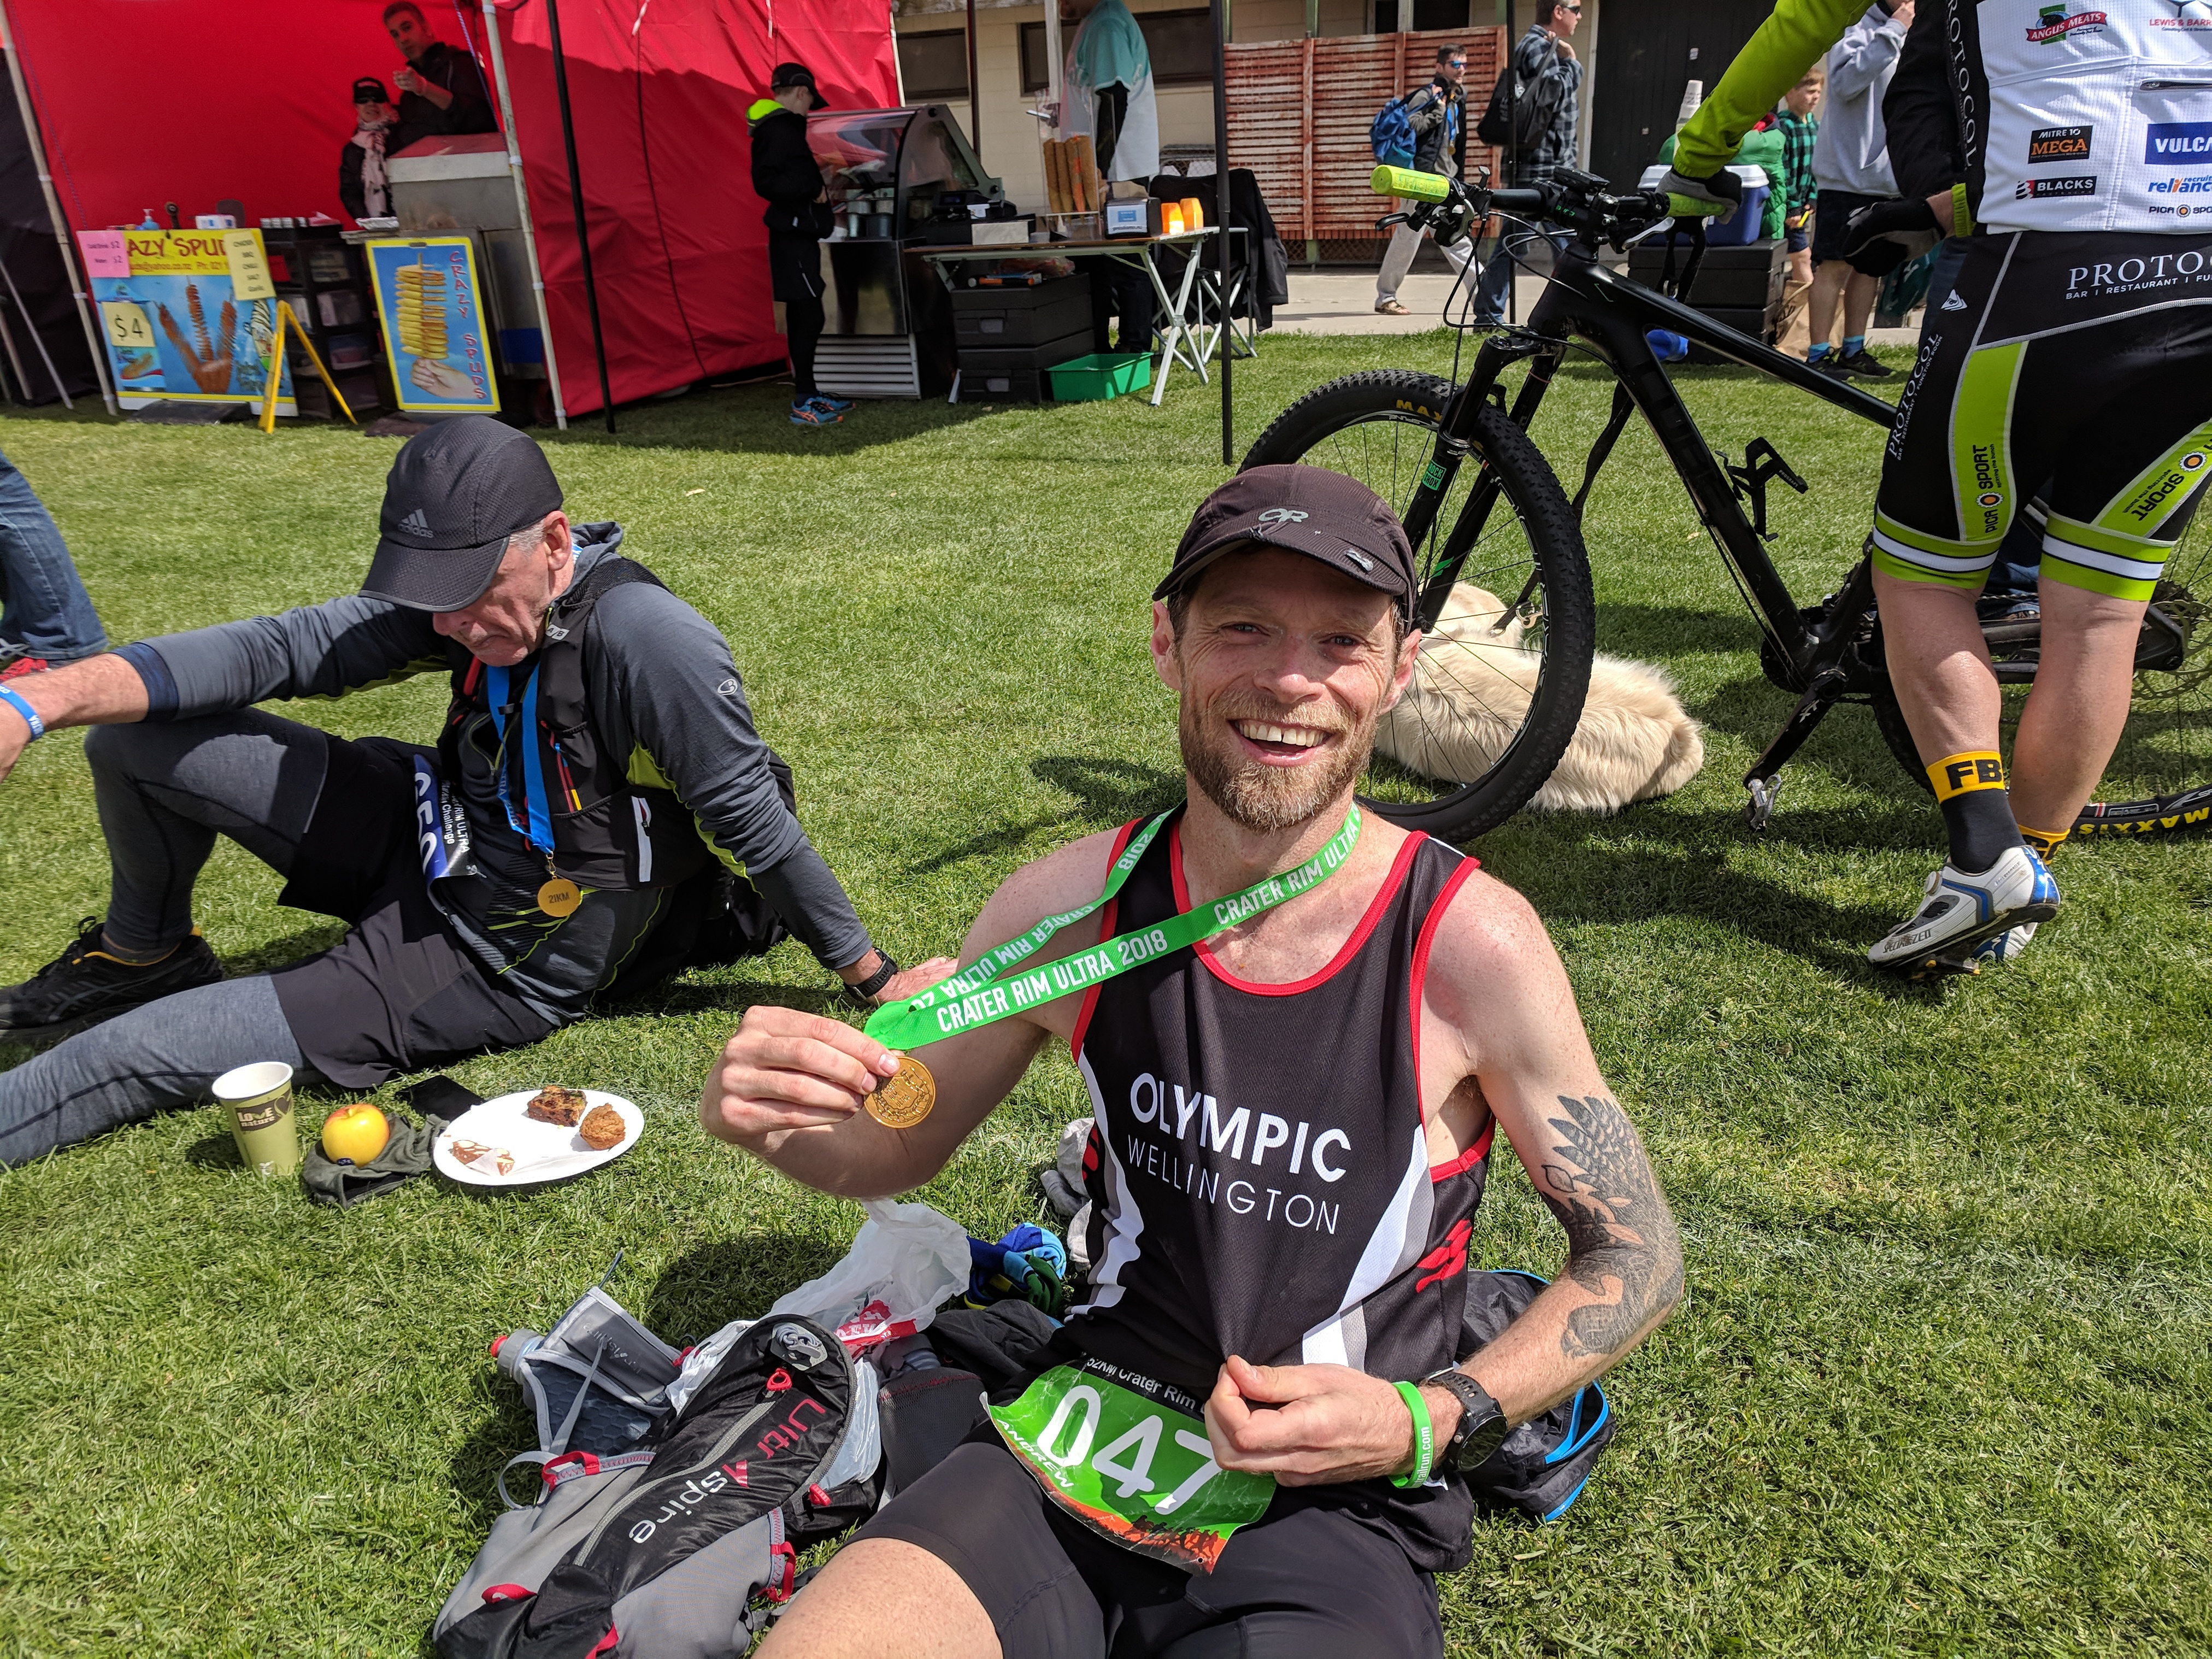 A race report about the time I became a national champion.